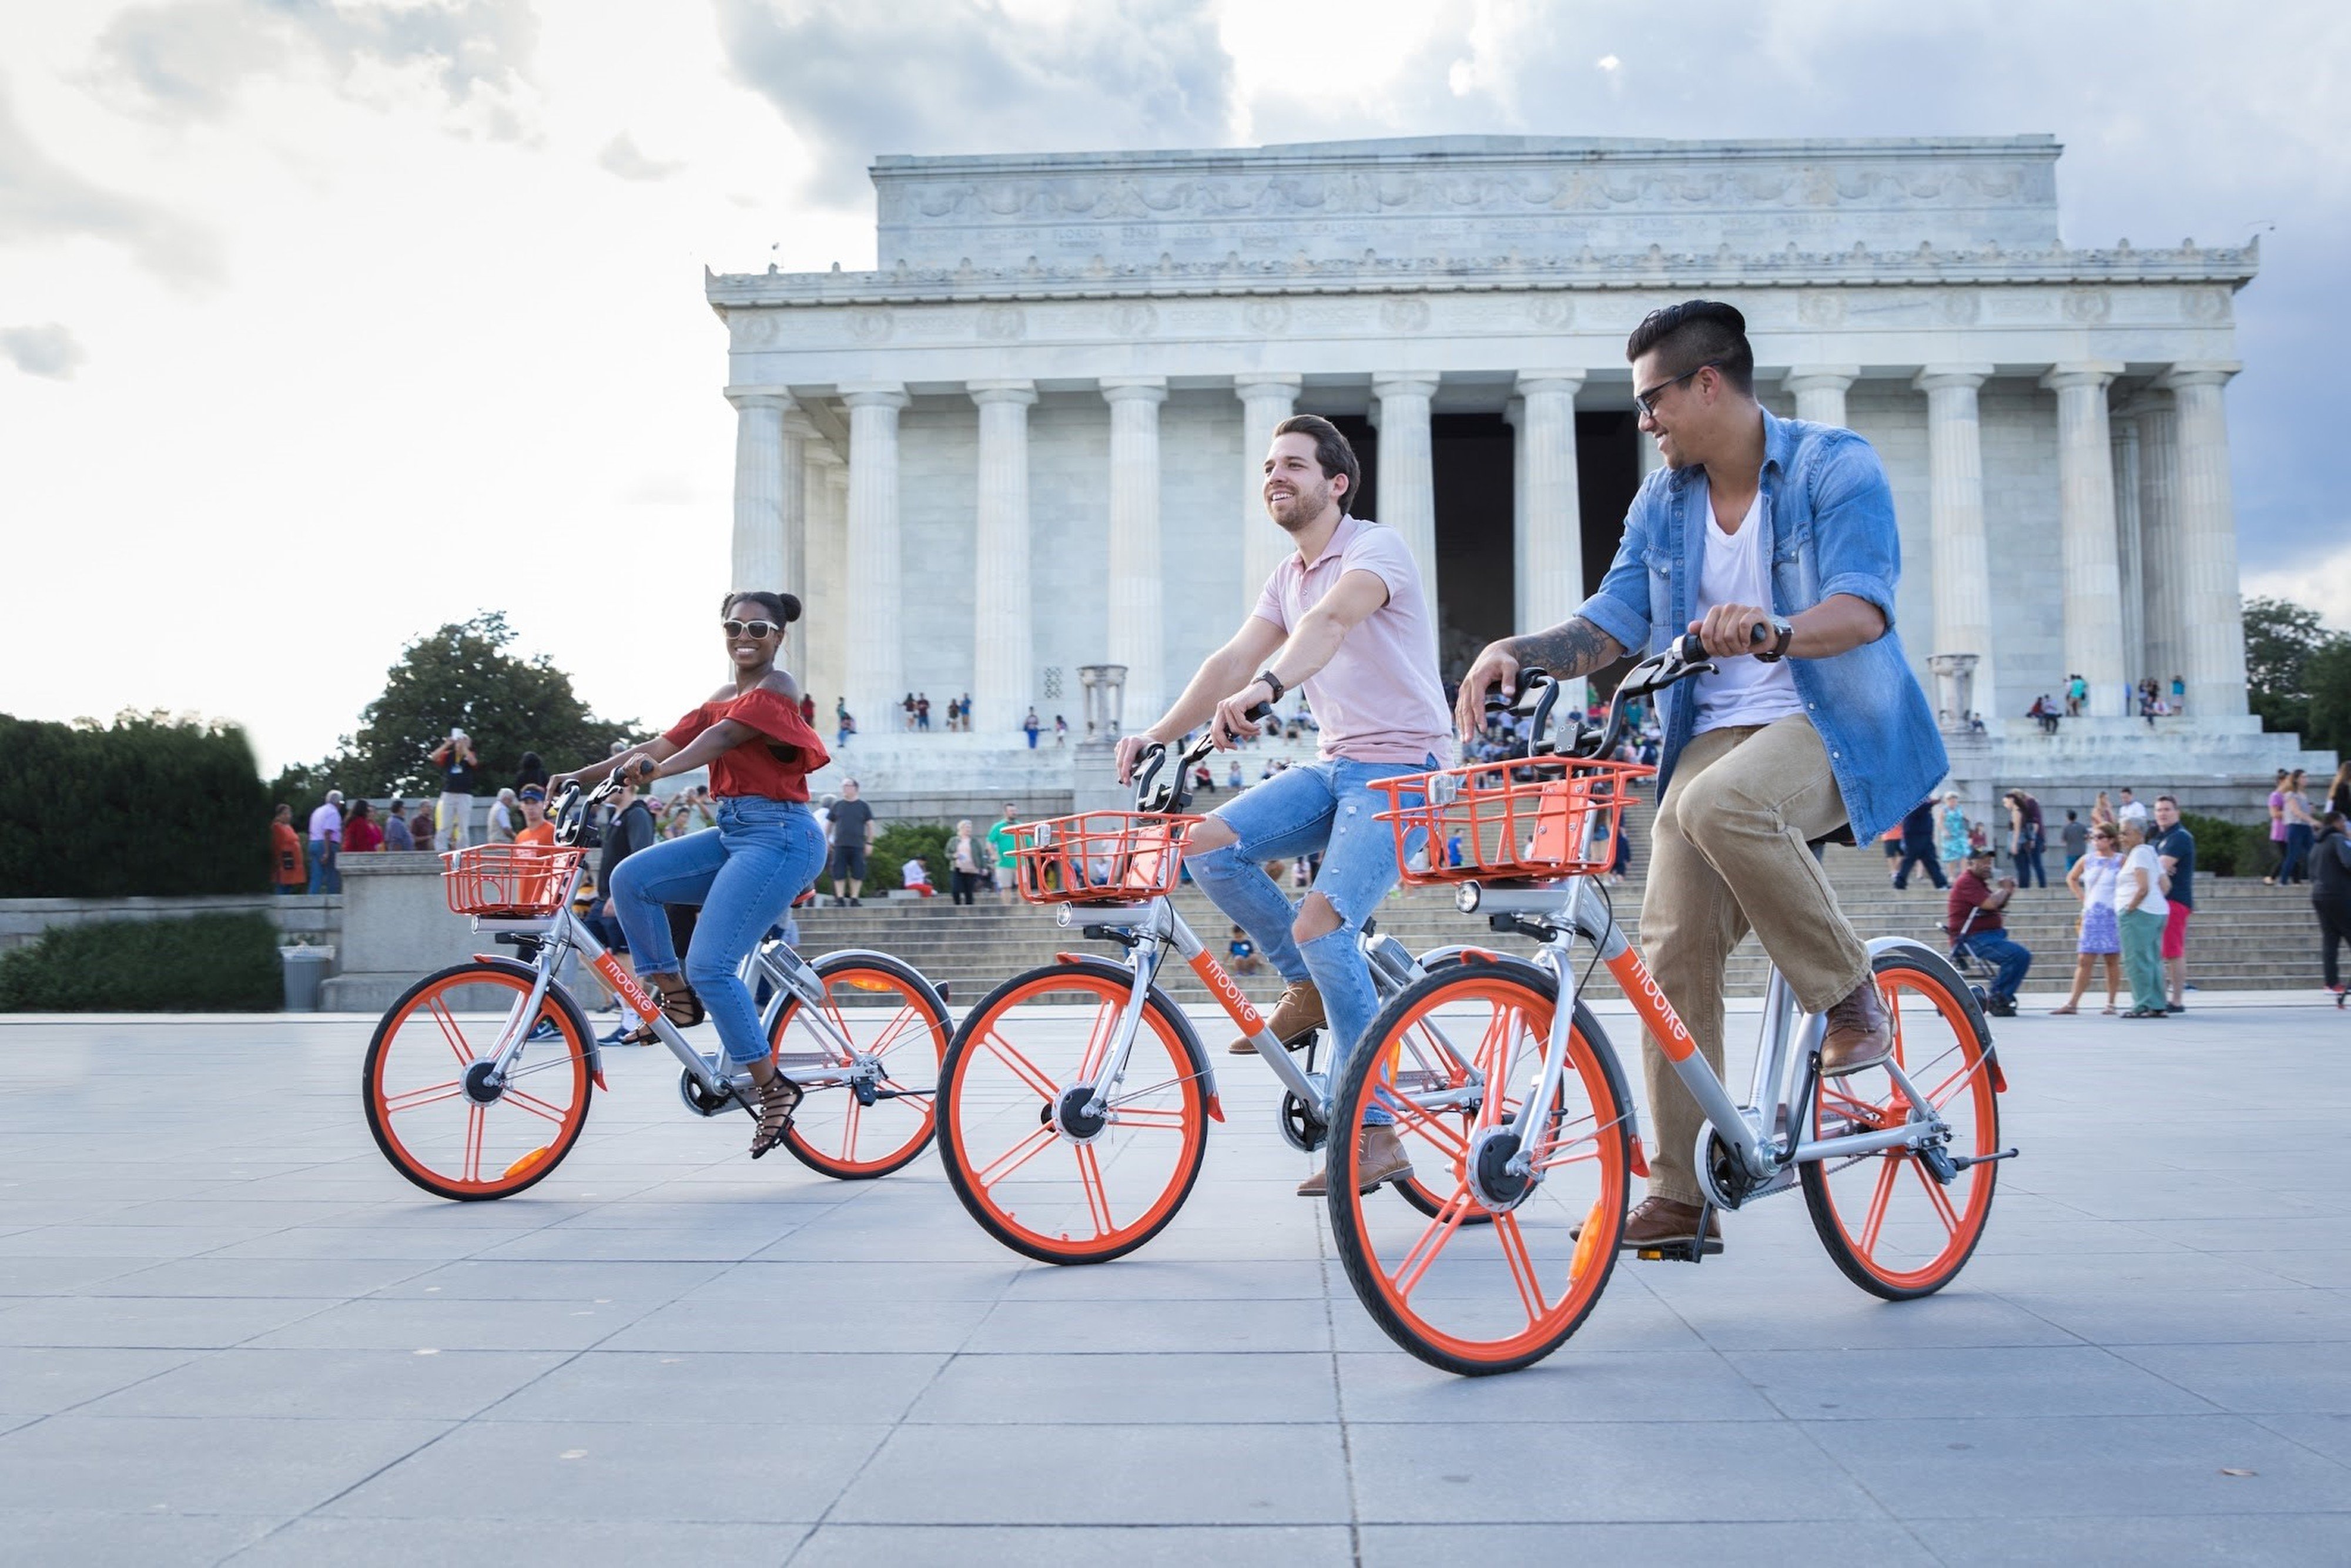 Beijing -- September 20, 2017 -- Mobike, the world's largest smart bike sharing company, has introduced its service in Washington, D.C., the capital of the United States.